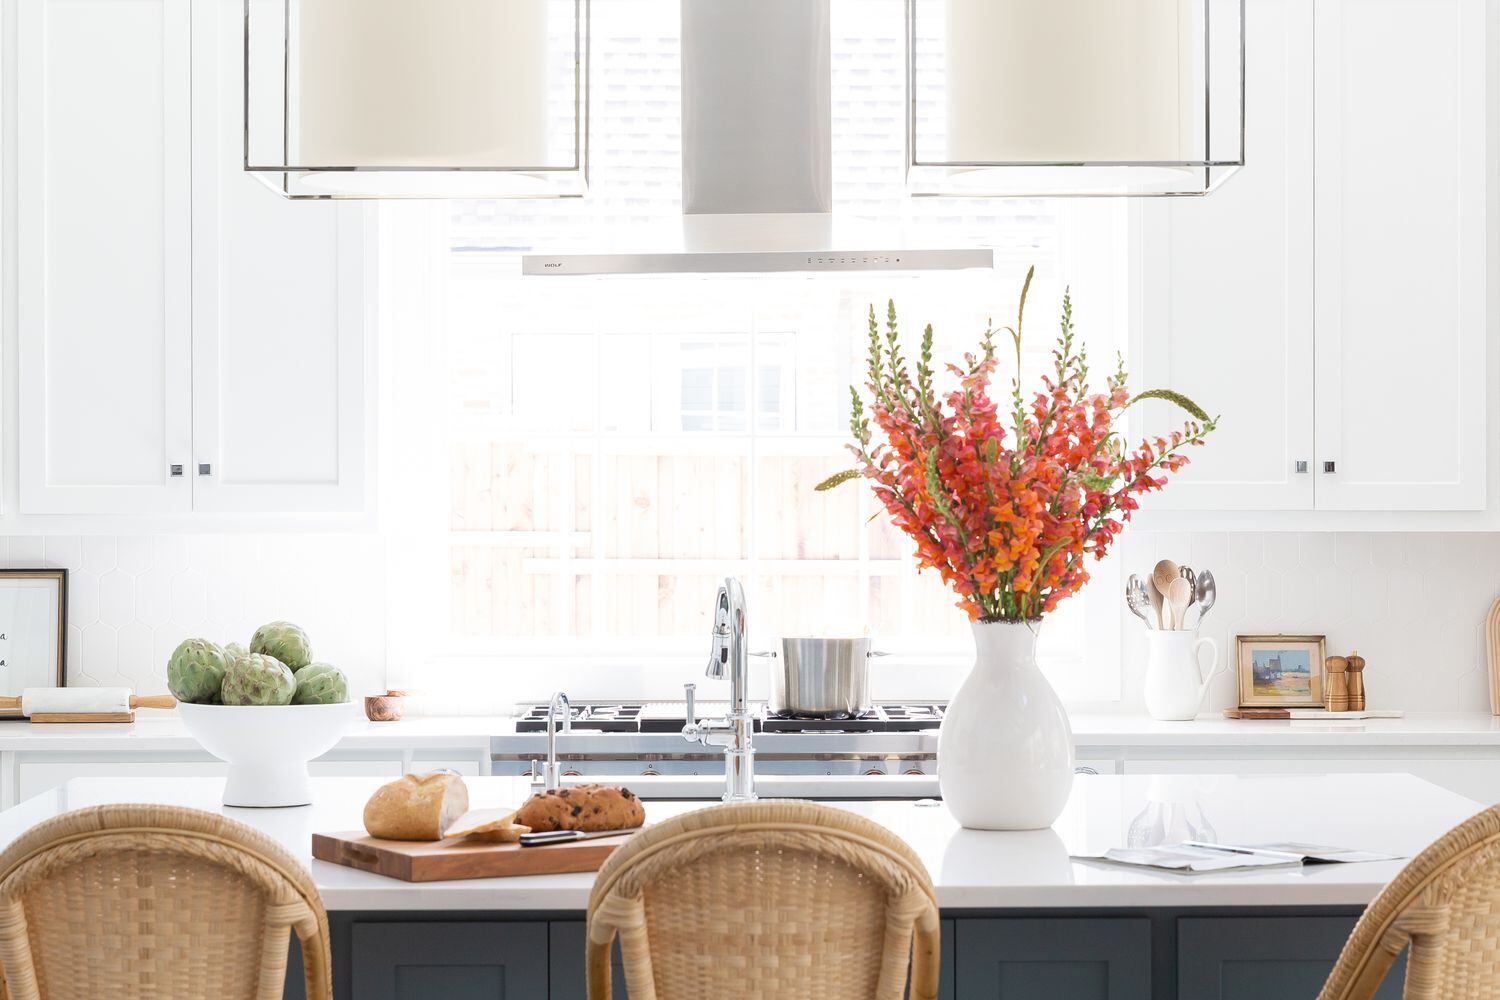 A thin, modern vent hood allows natural light to flow into a white kitchen with orange...